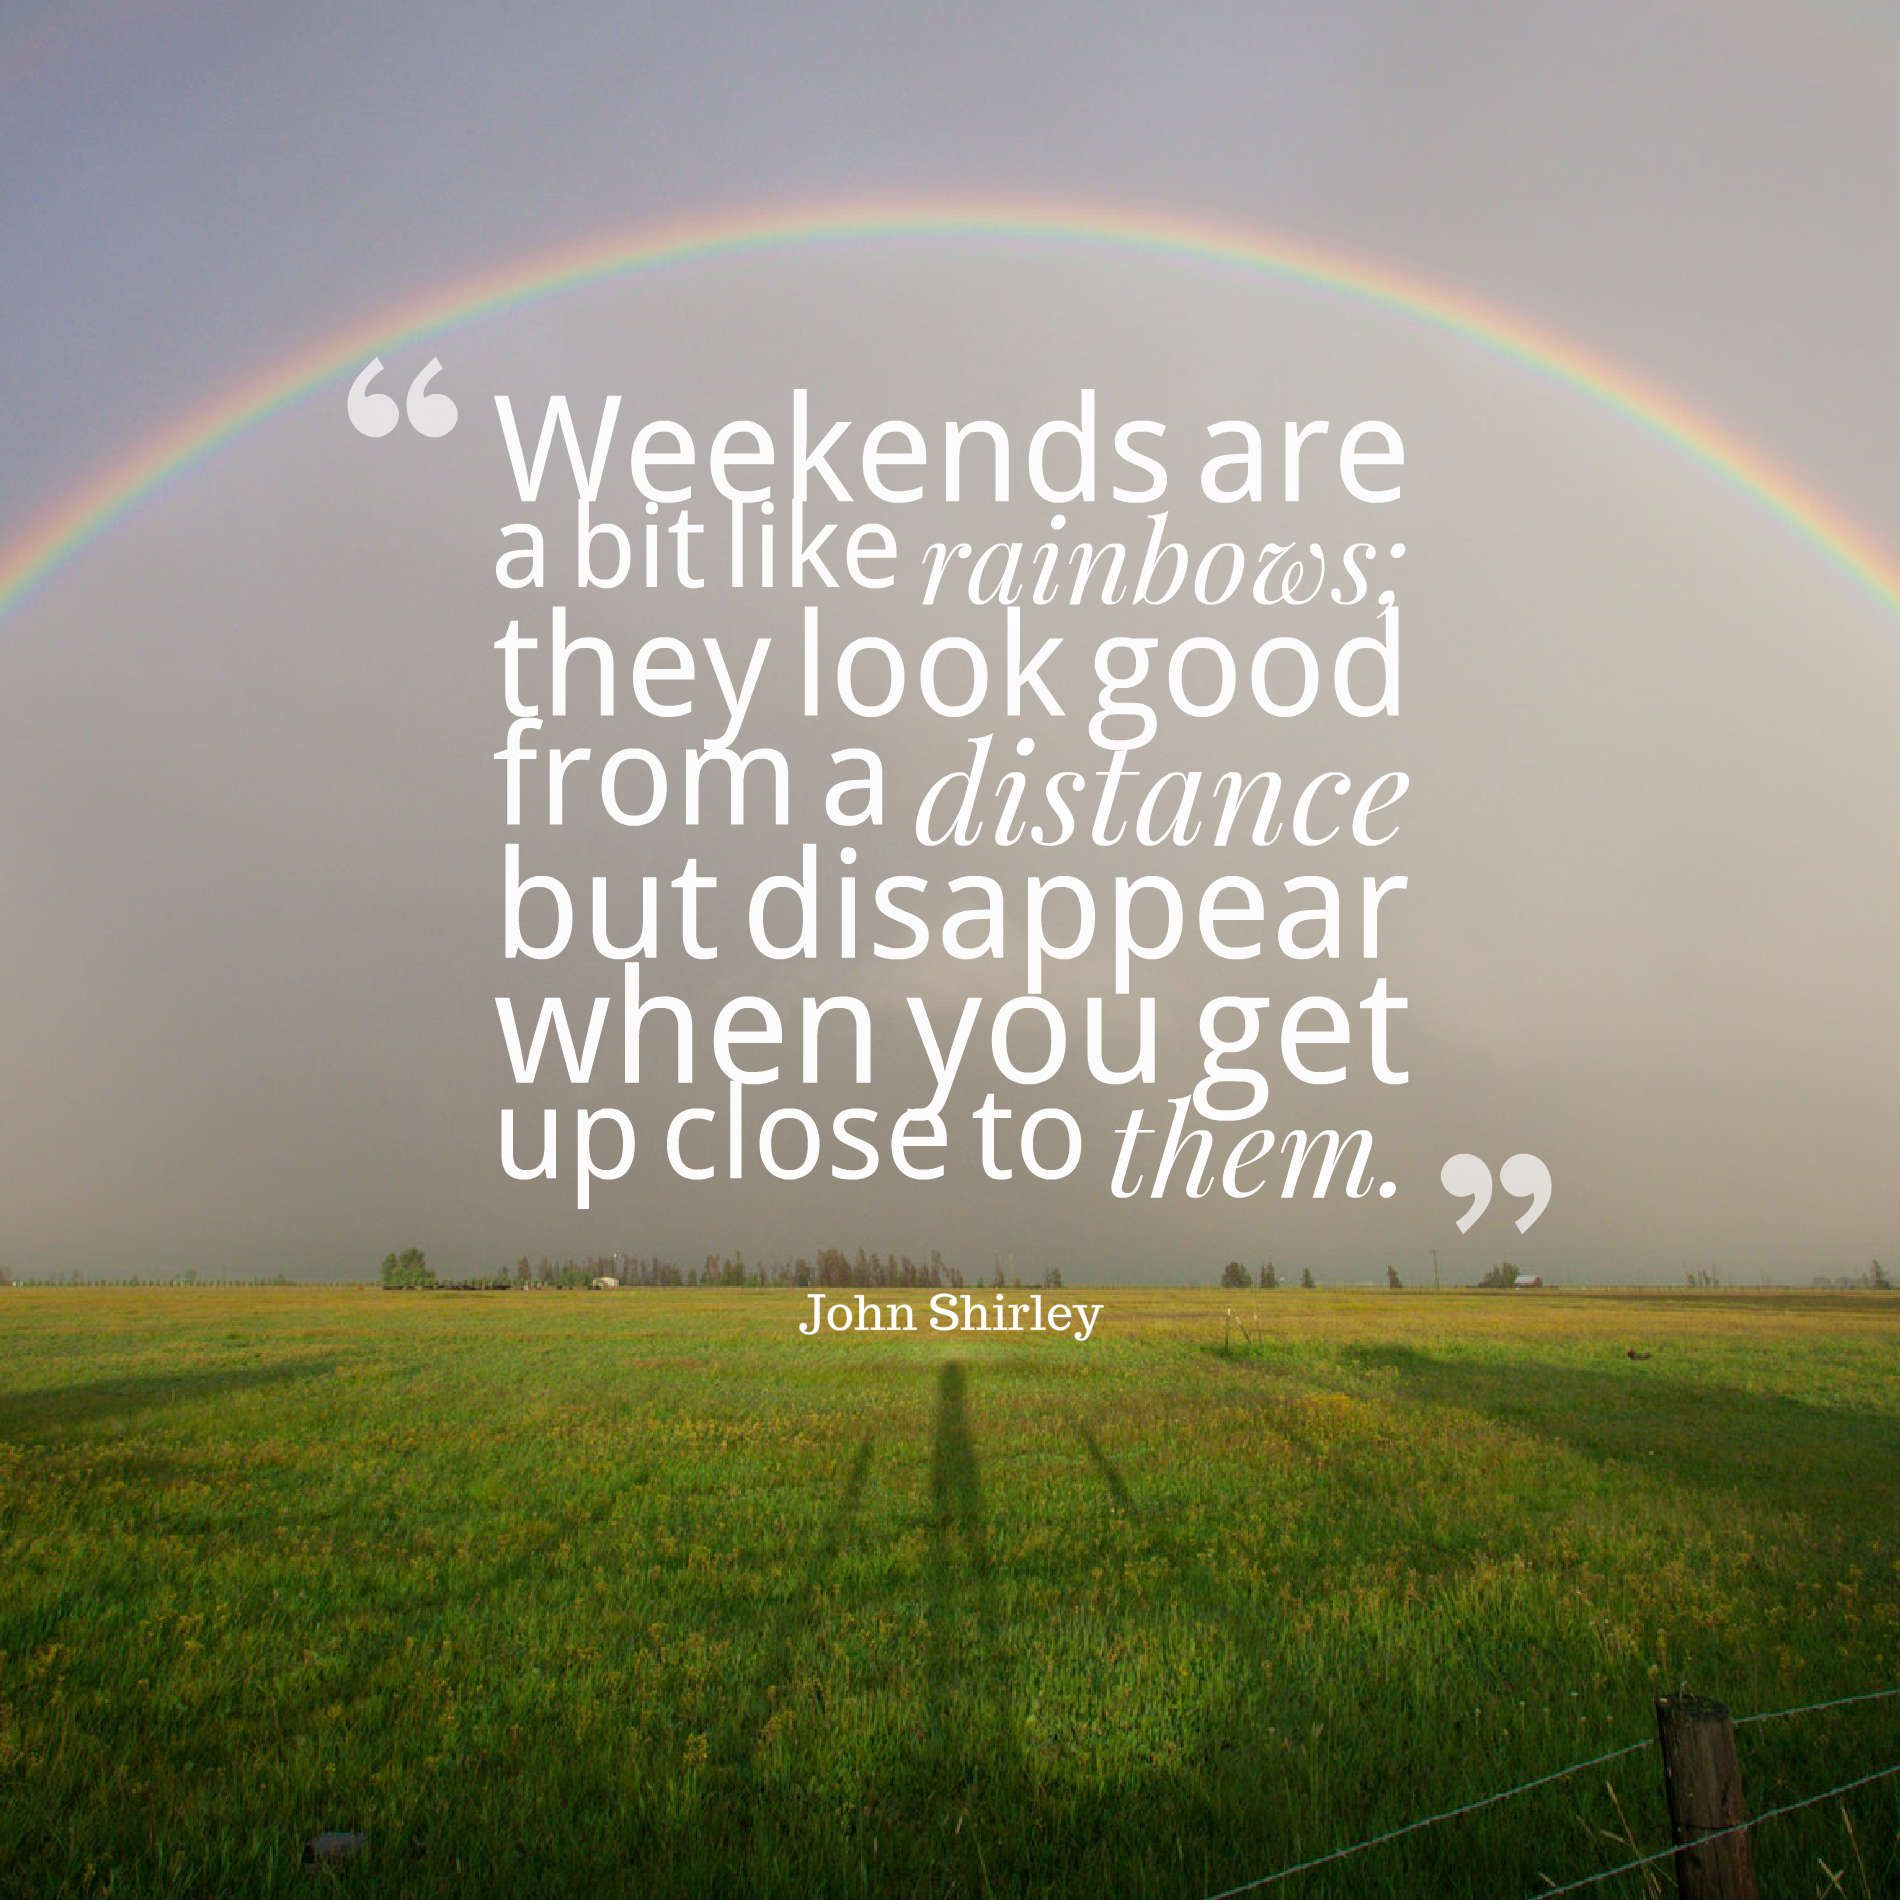 Weekends are a bit like rainbows they look good from a distance but disappear when you get up close to them.